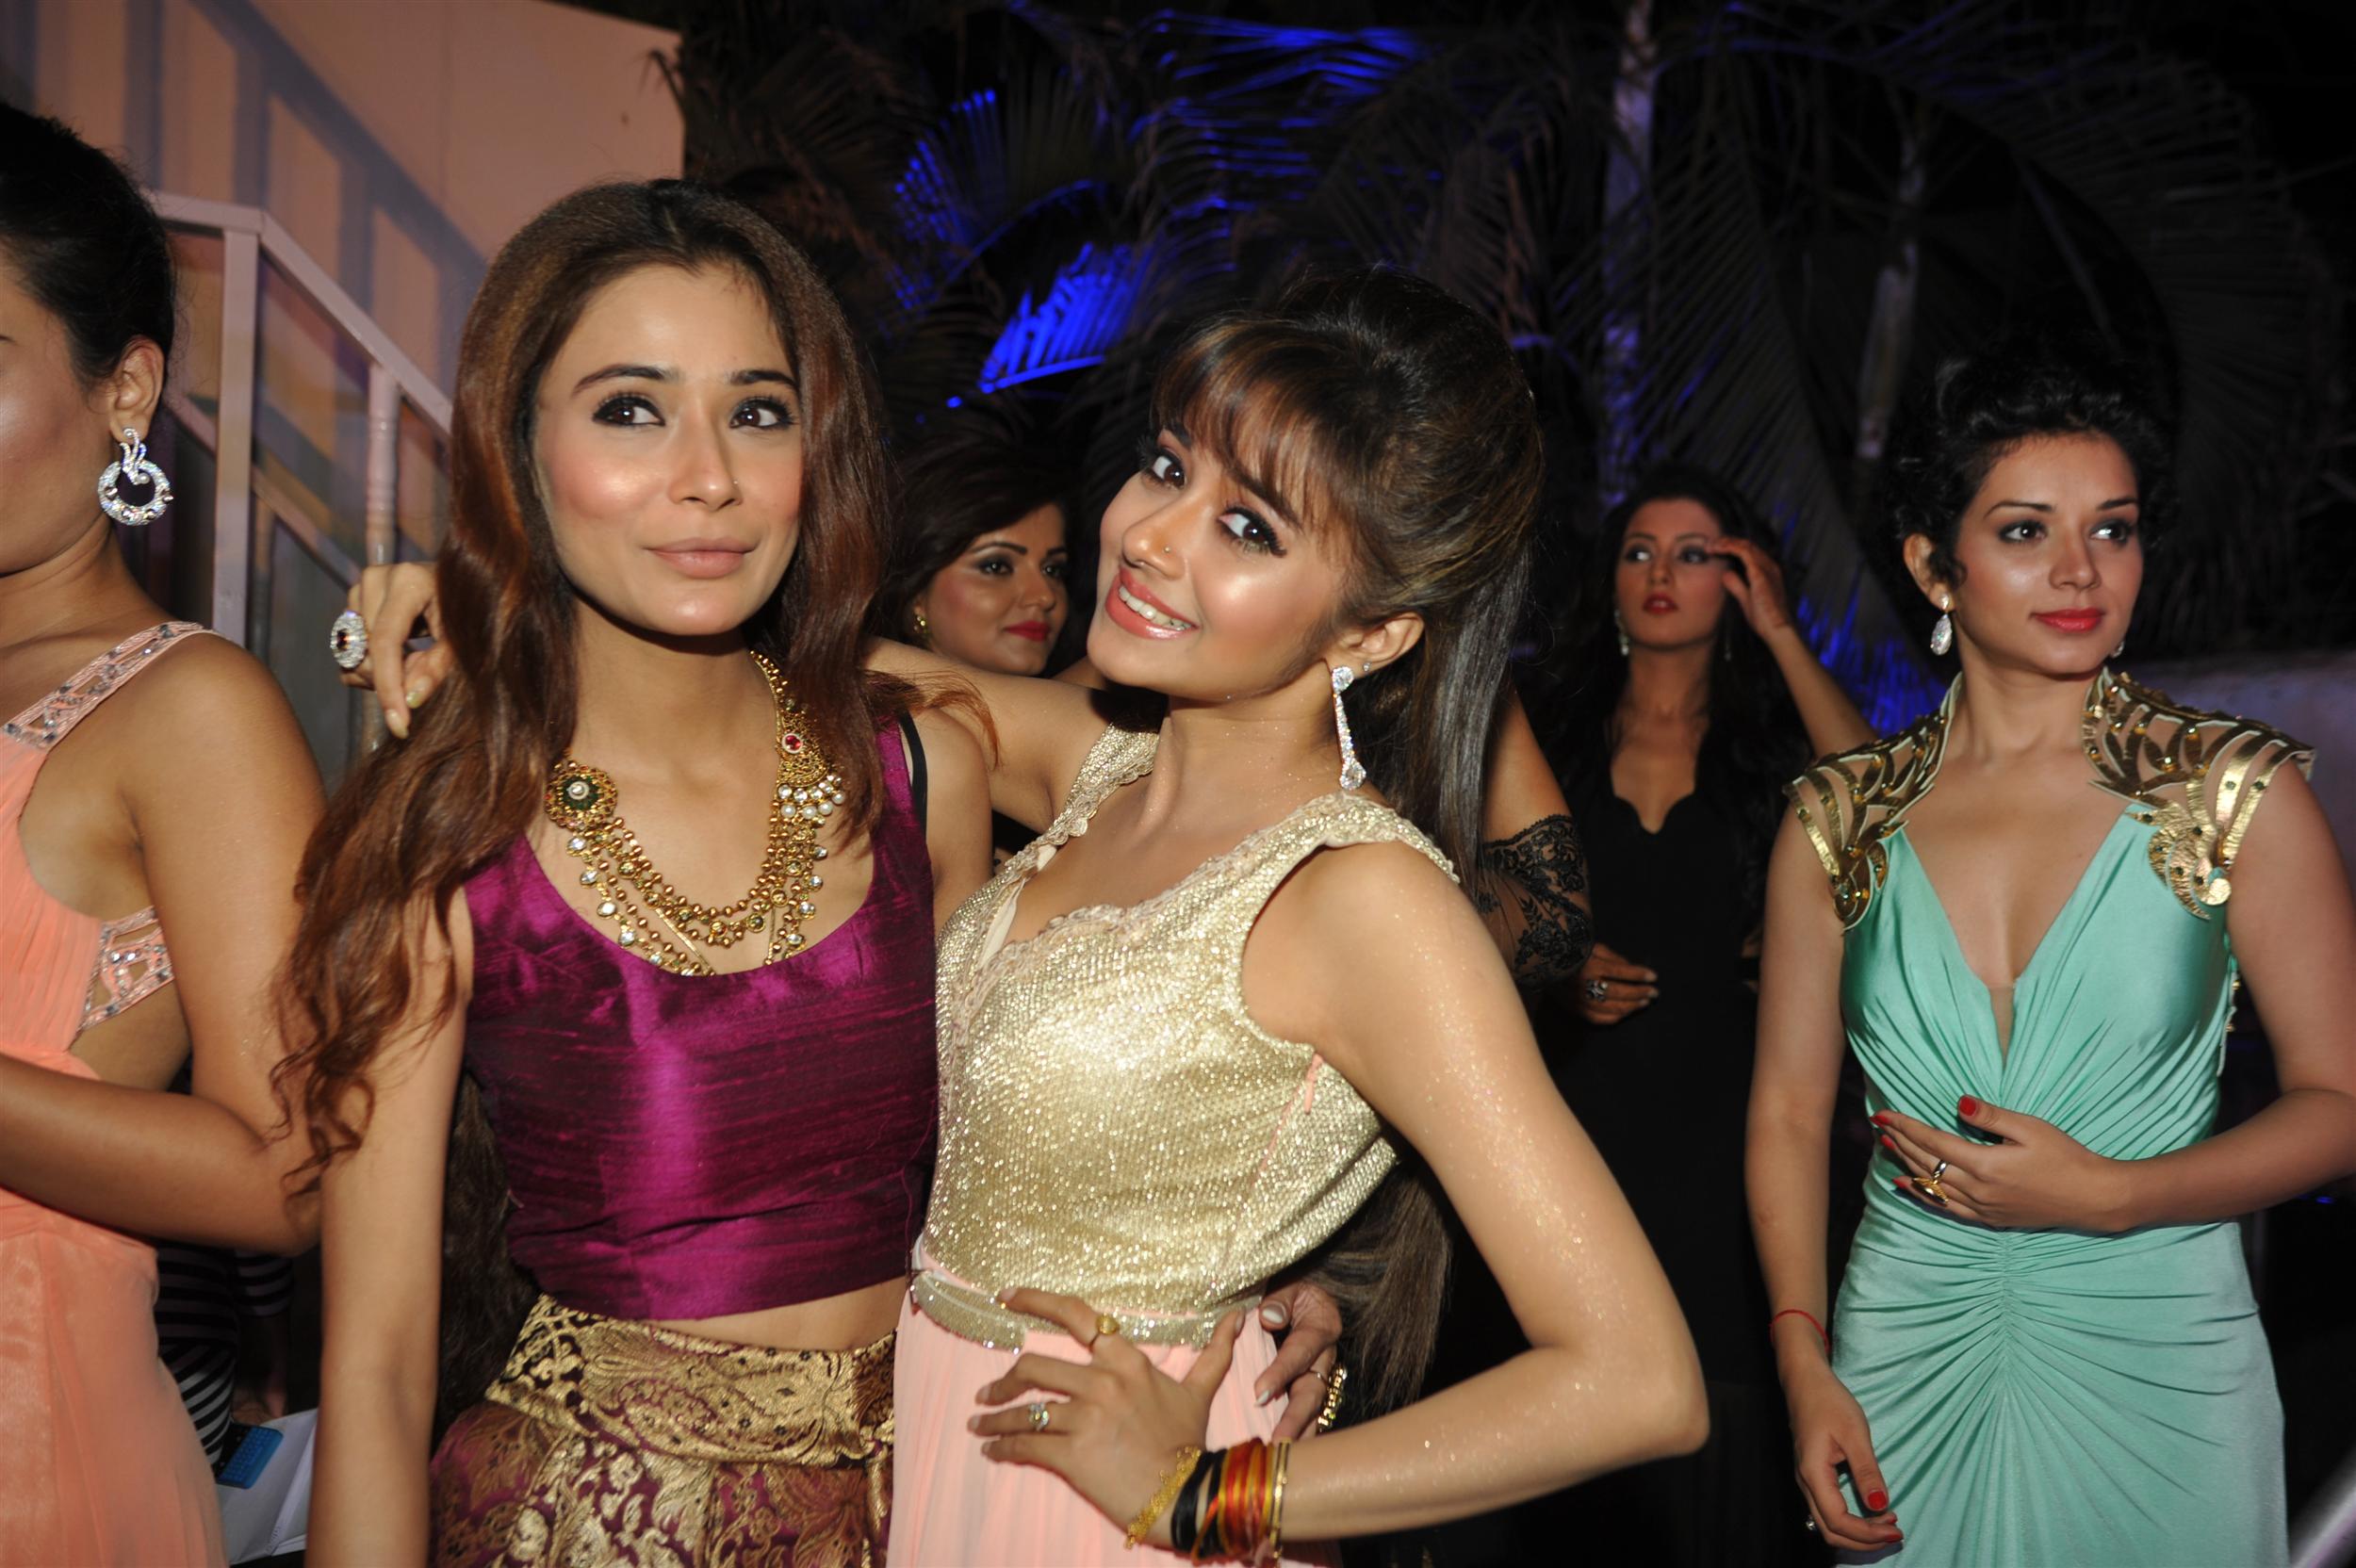 TV Actresses Walk The Ramp at The Launch of Telly Calendar 2015